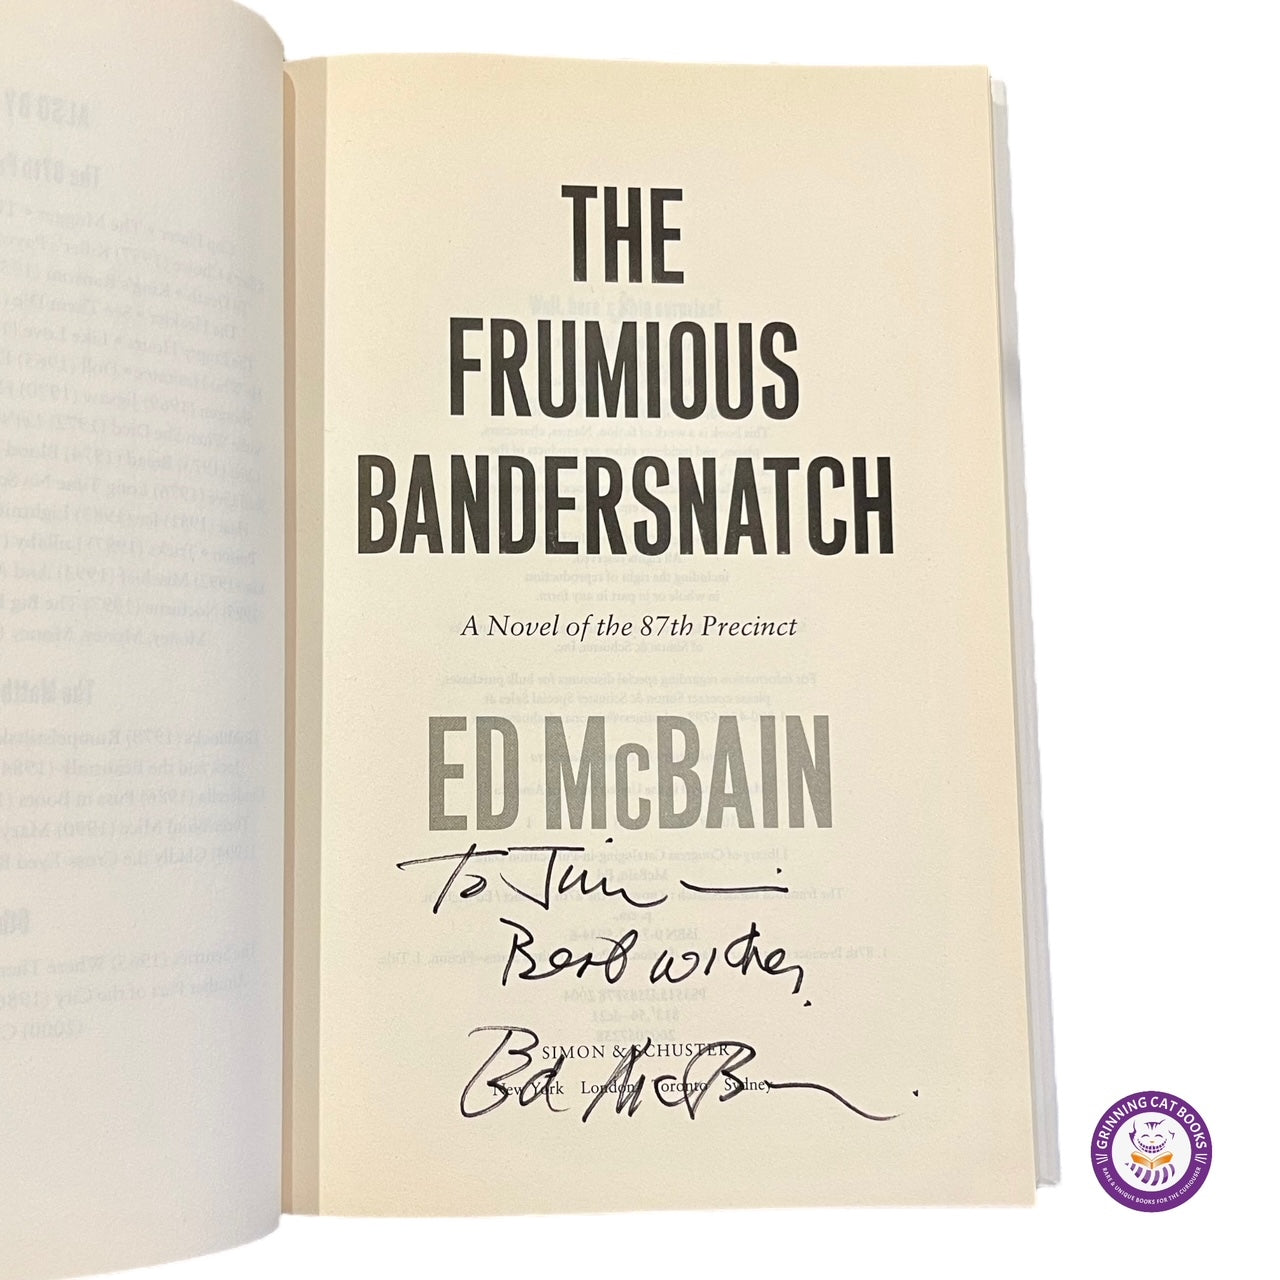 The Frumious Bandersnatch (signed by Ed McBain)